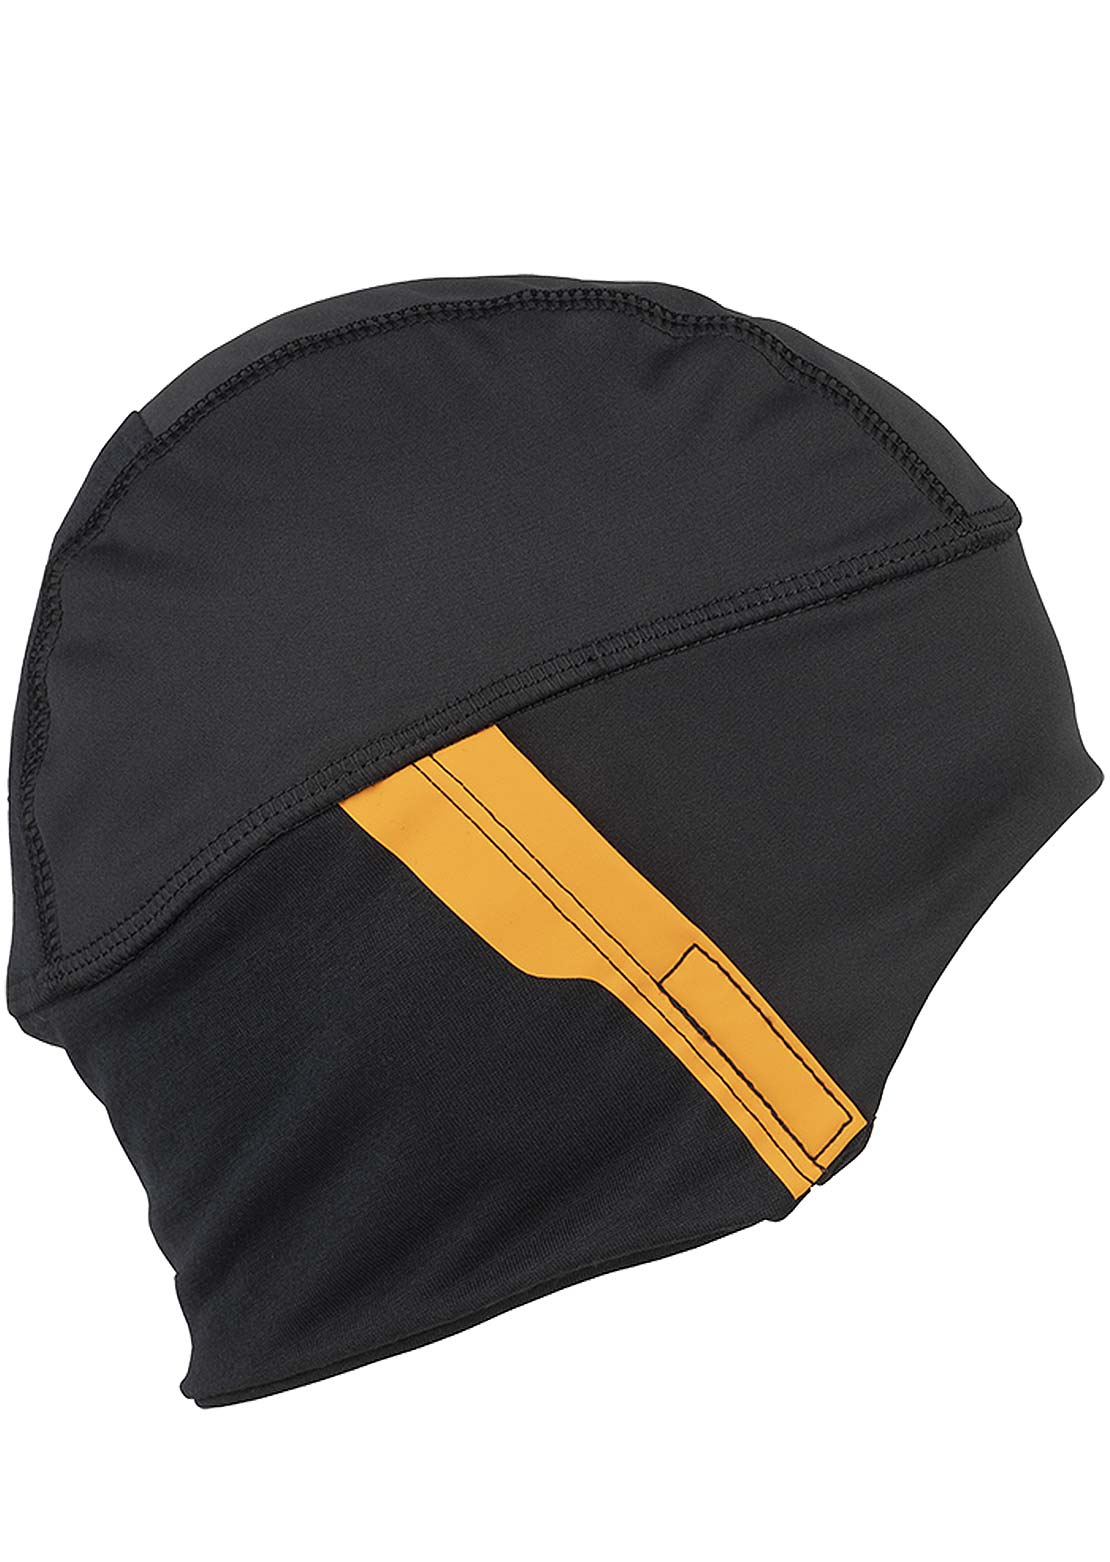 45NRTH Stovepipe Wind Resistant Cycling Winter Cap Black